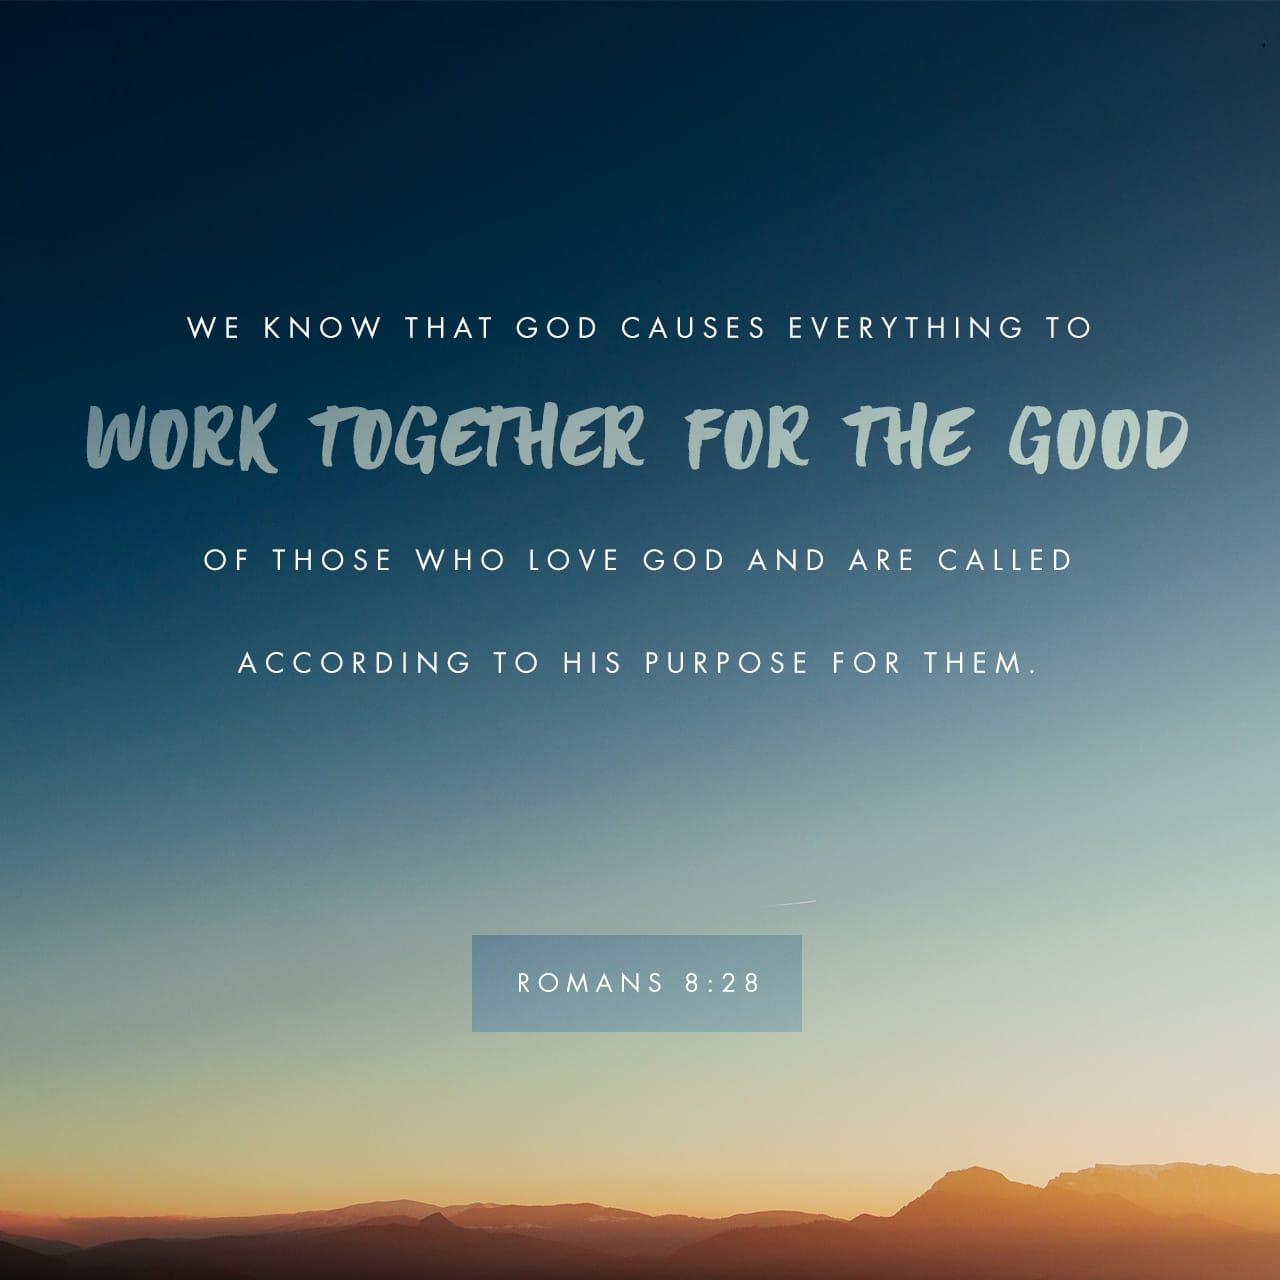 Bible Verse of the Day - day 150 - image 7408 (Romans 8:28)